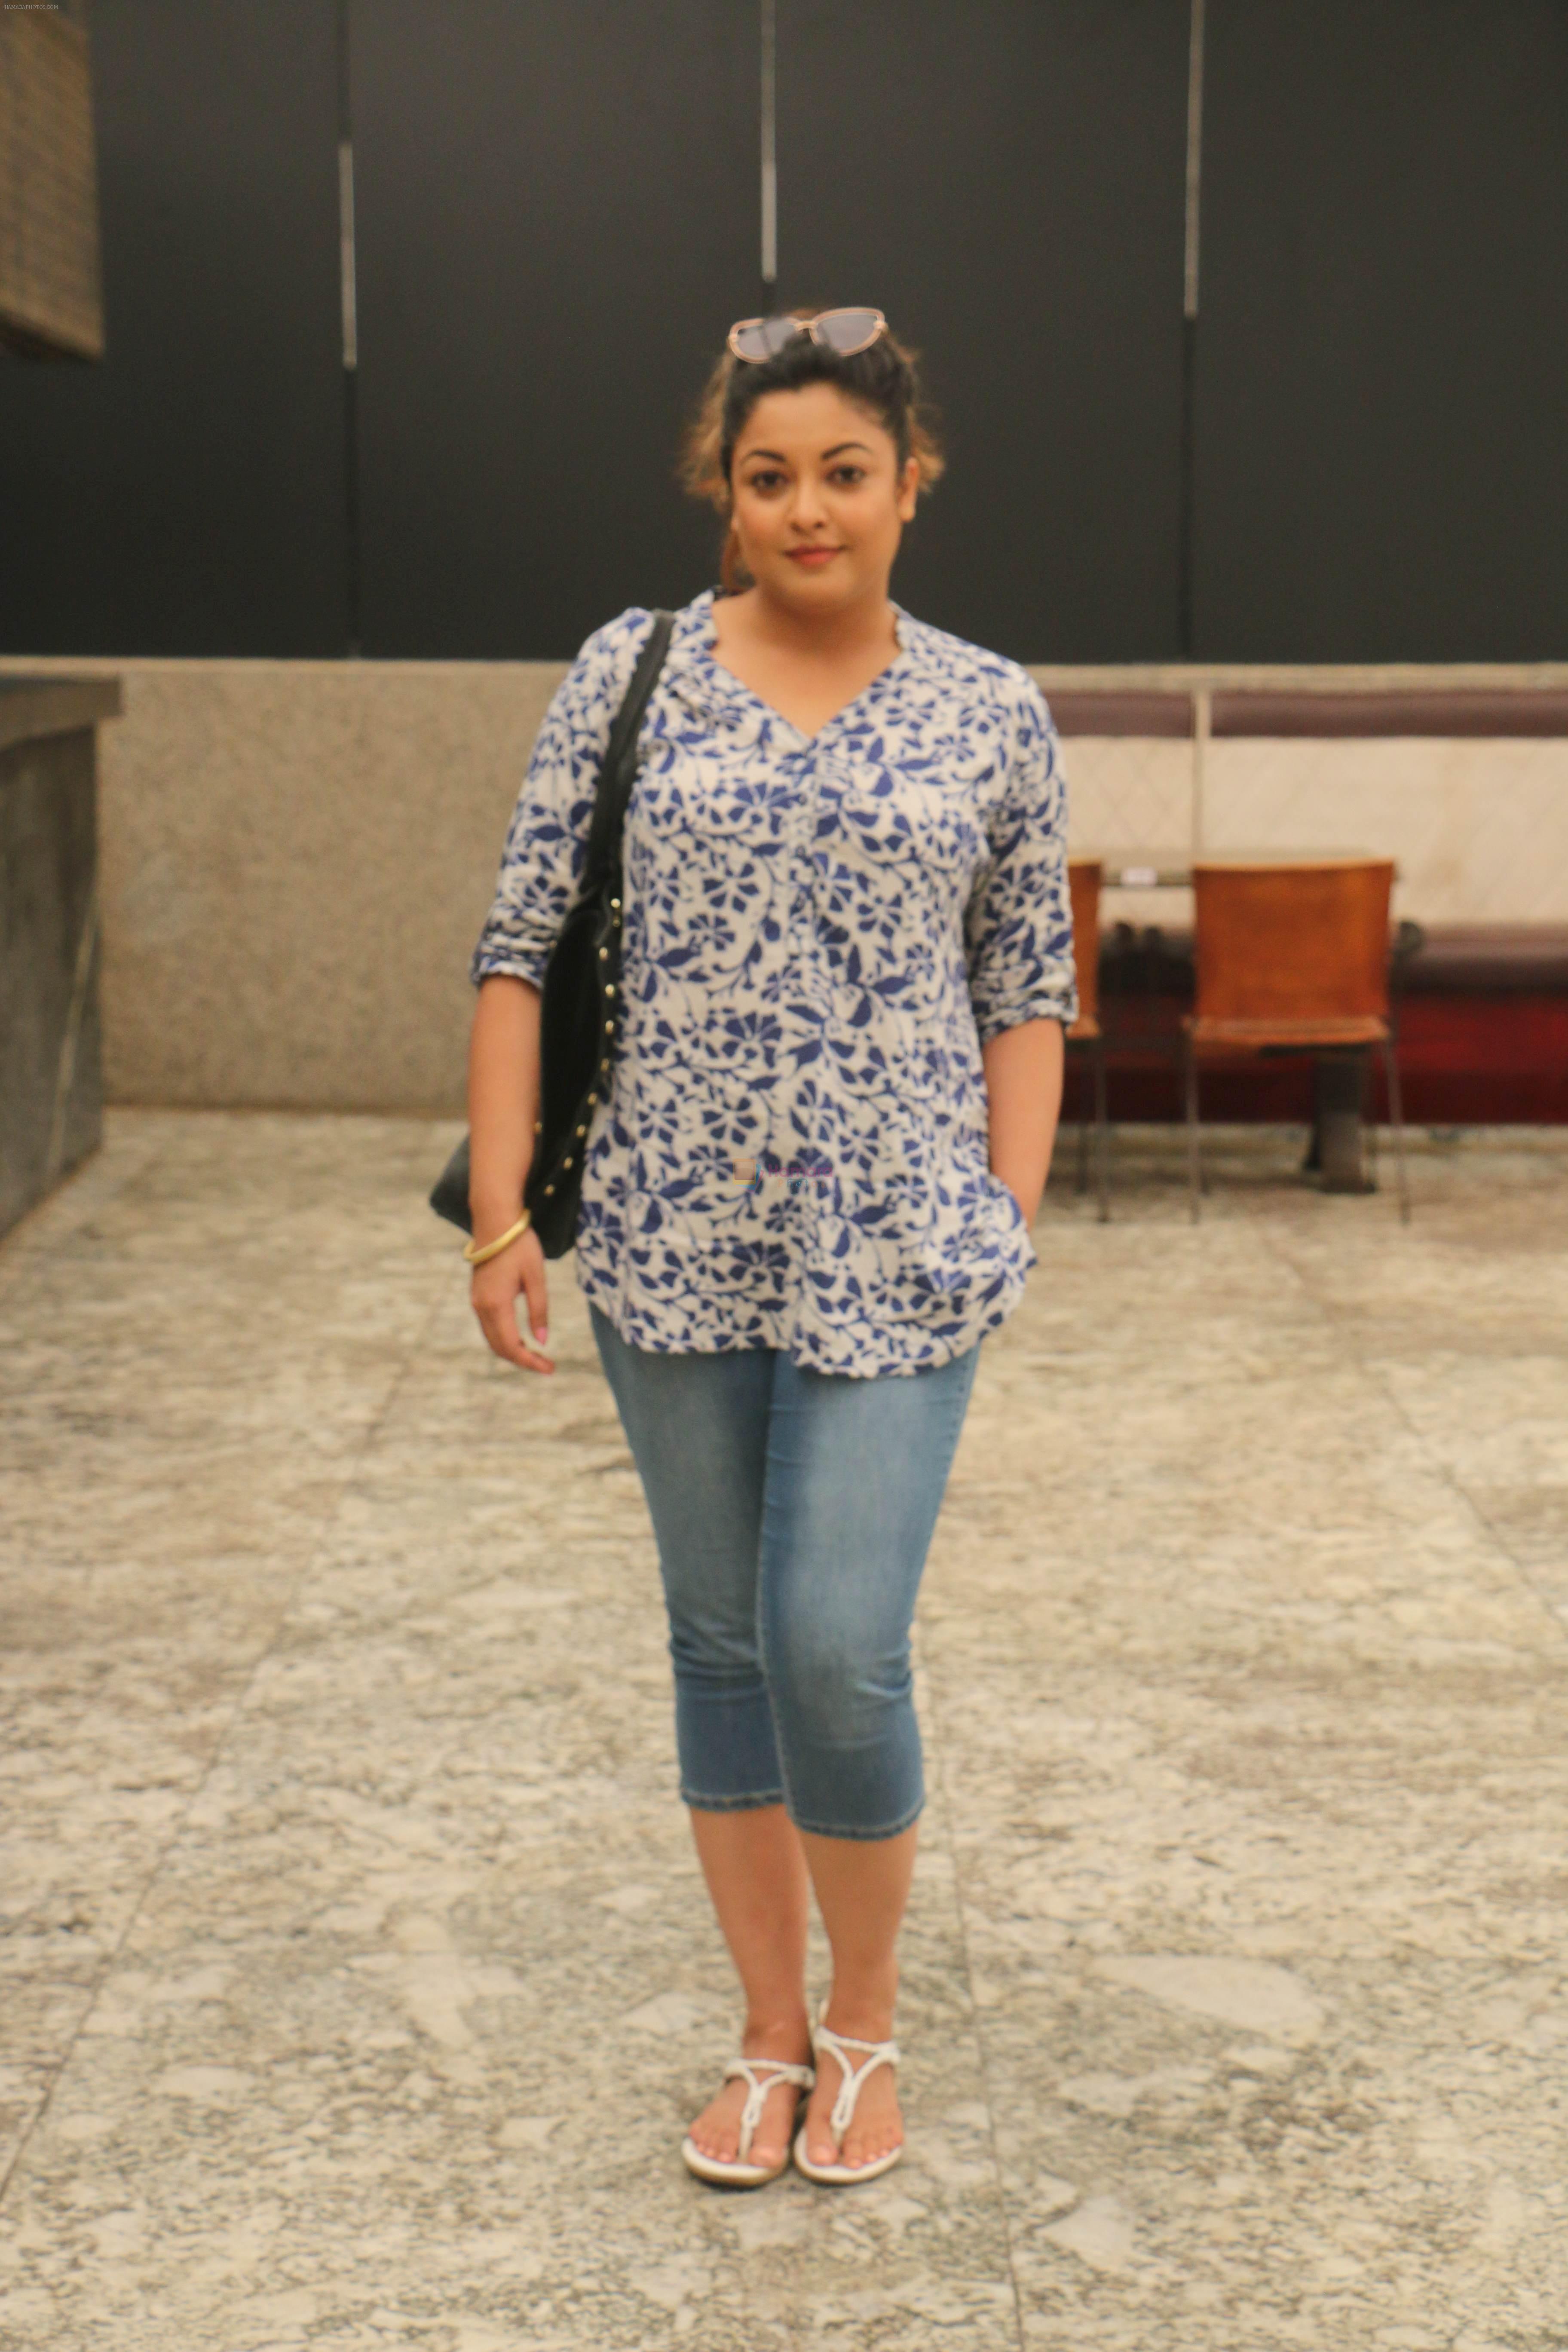 Tanushree Dutta inteacts with media for the M2 campaign at juhu on 27th Sept 2018